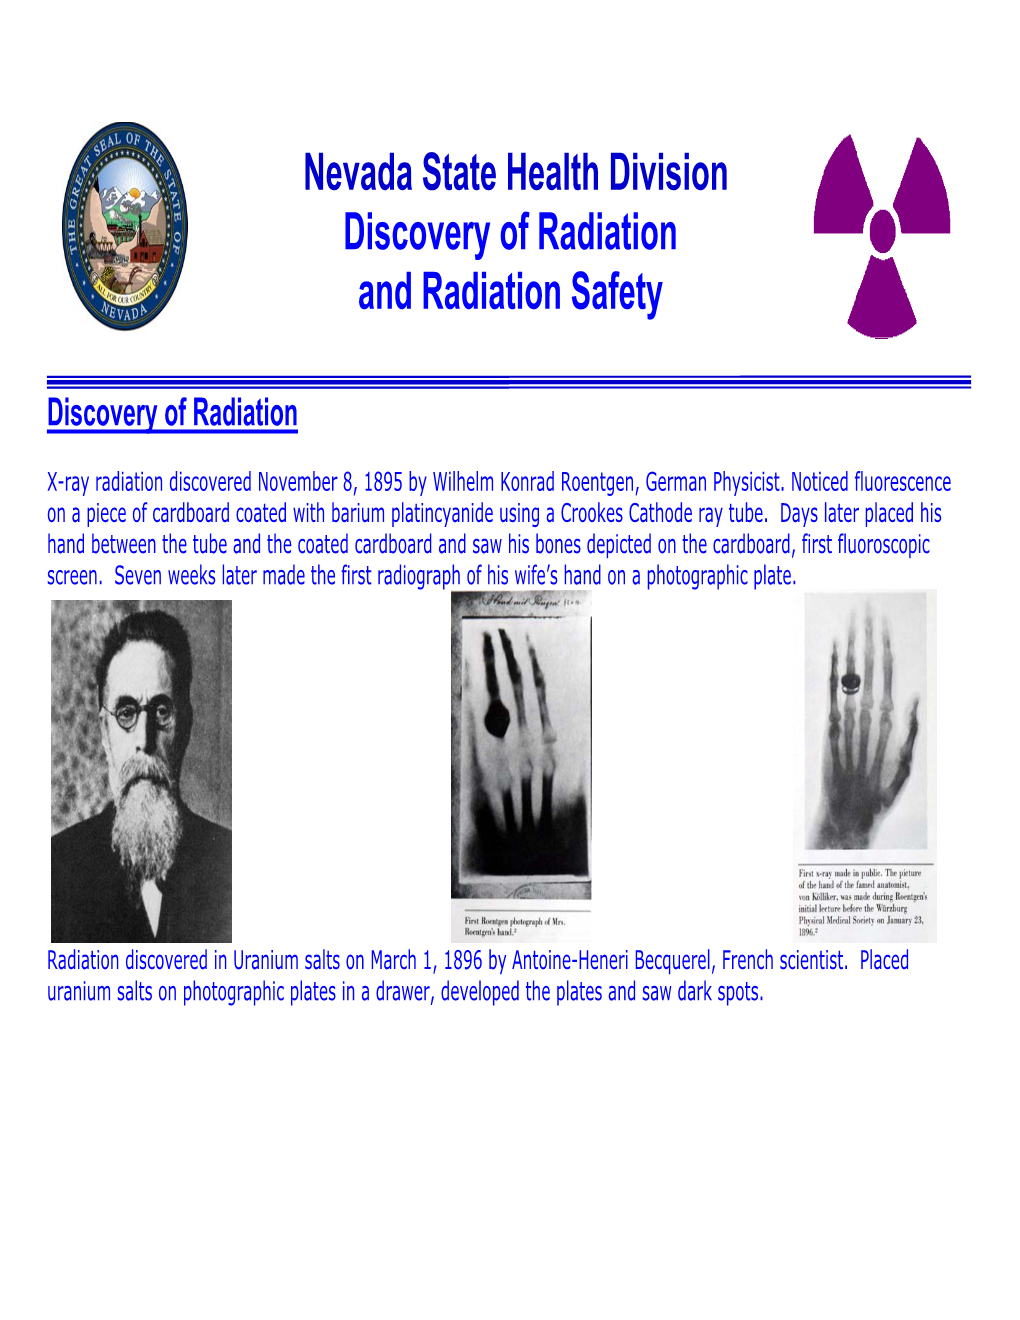 Nevada State Health Division Discovery of Radiation and Radiation Safety